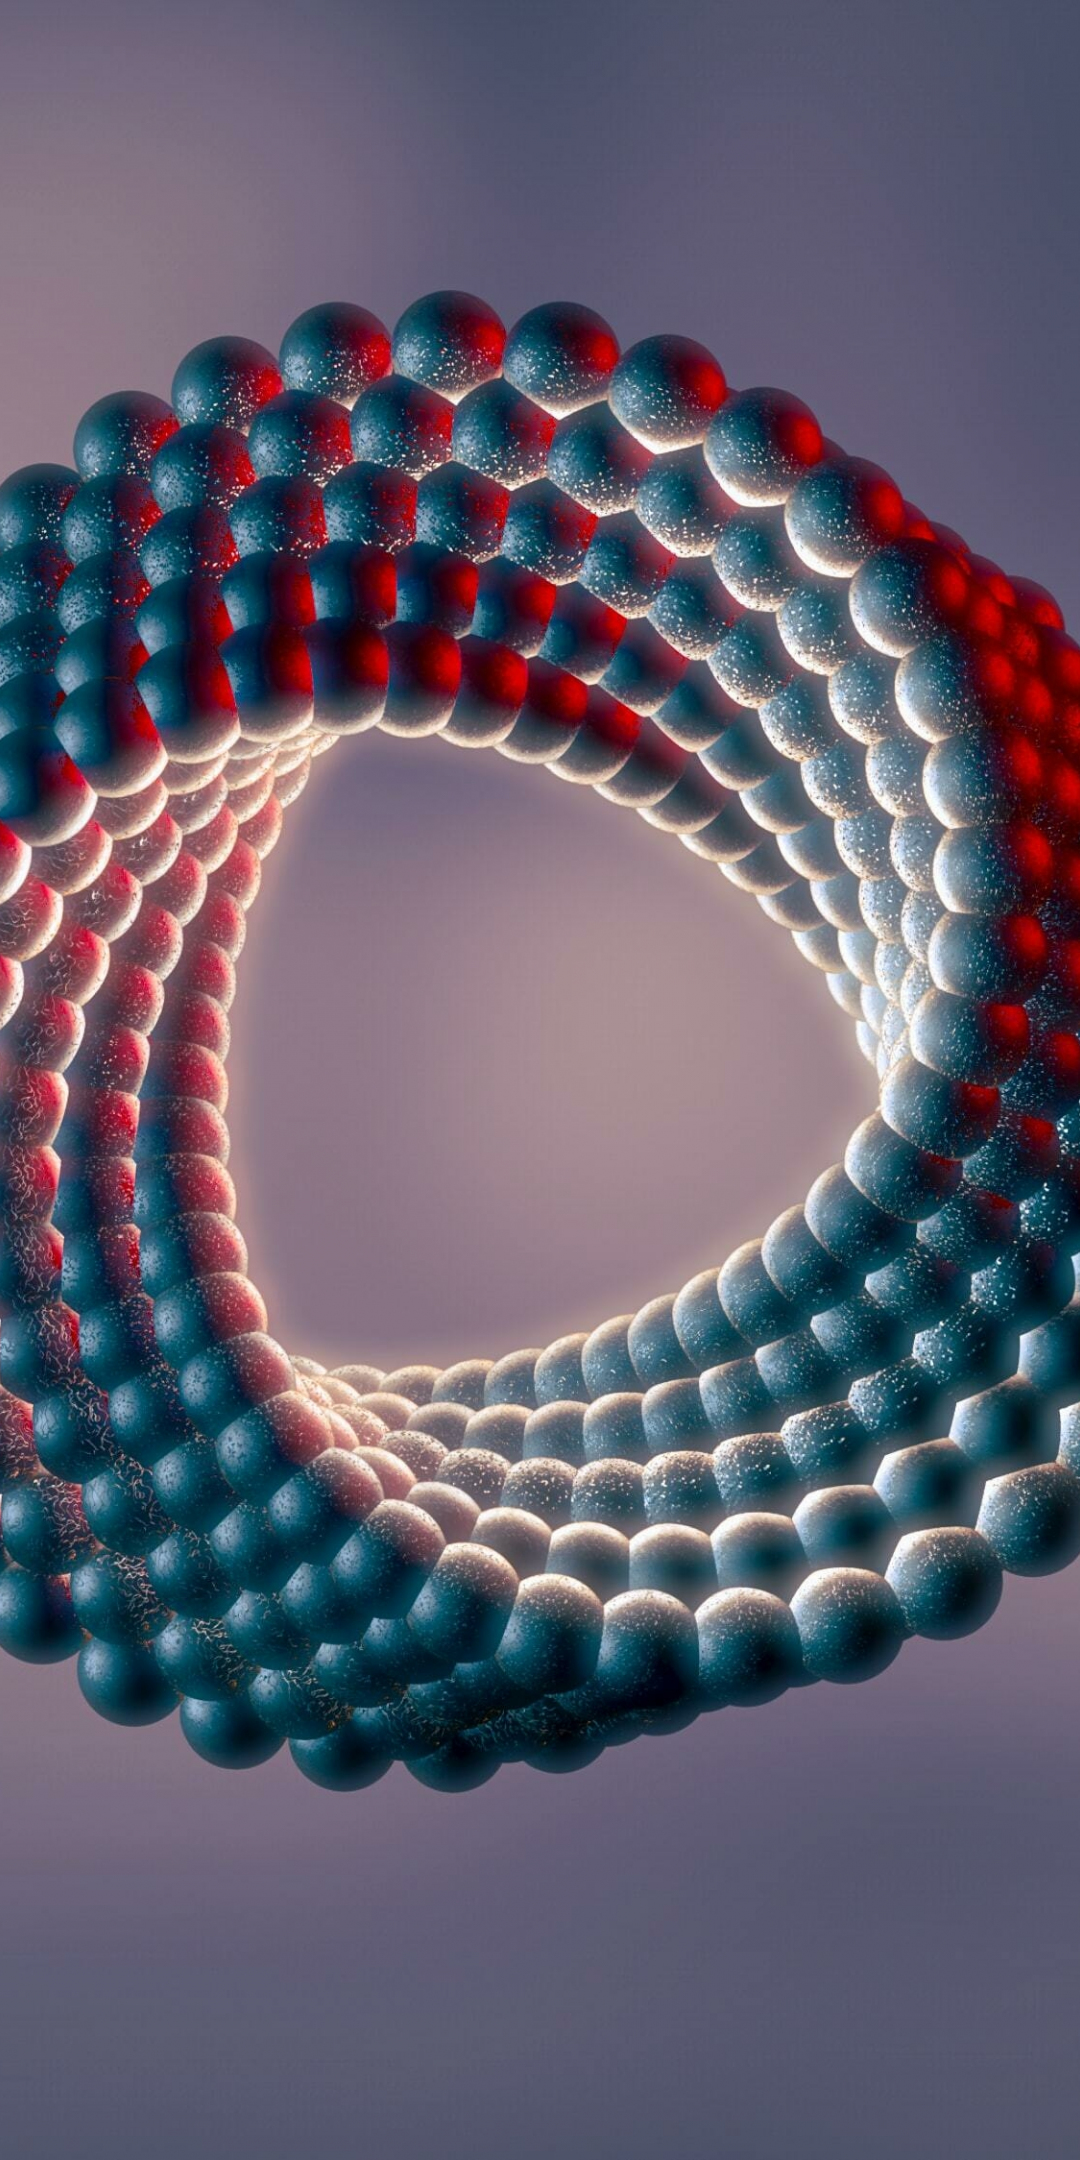 Balls ring, structure, abstract, 1080x2160 wallpaper